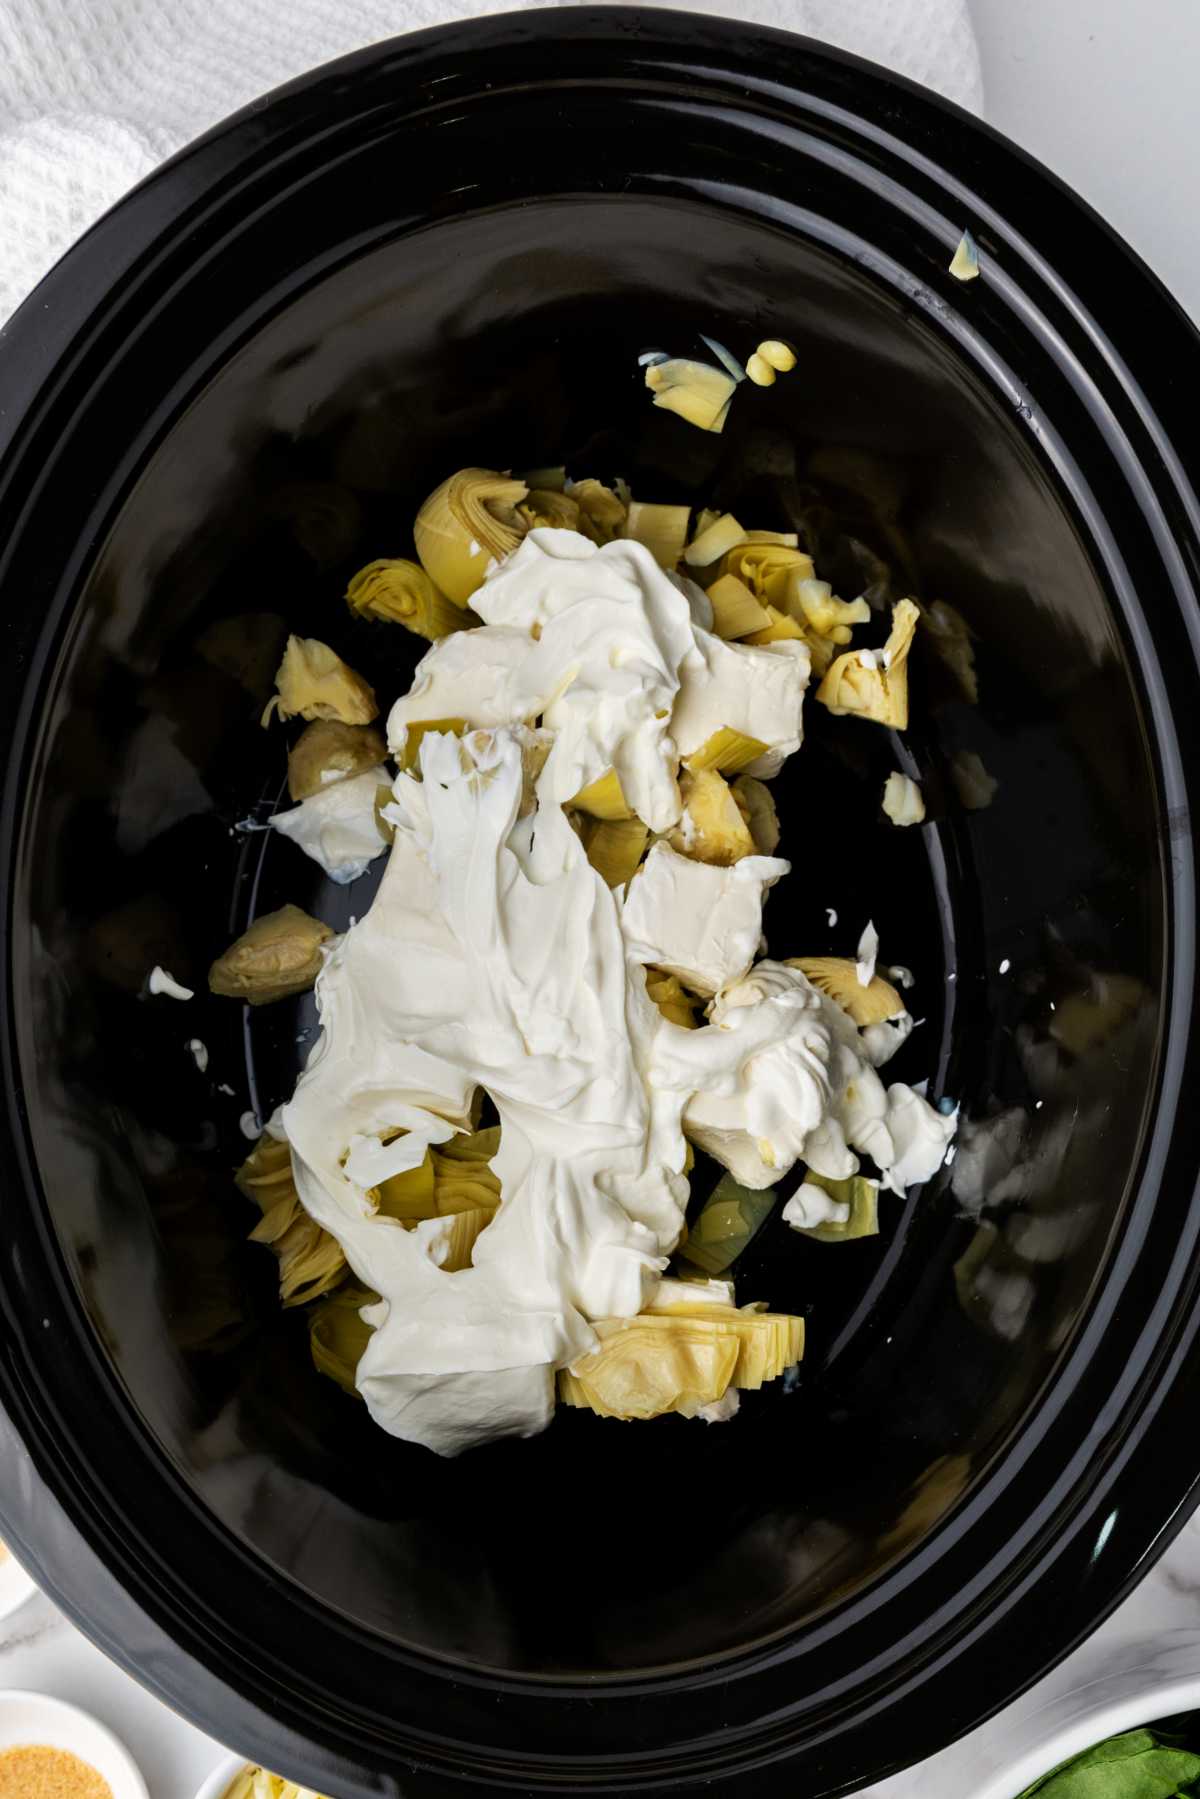 sour cream added on top of cream cheese and vegetable in a crockpot.